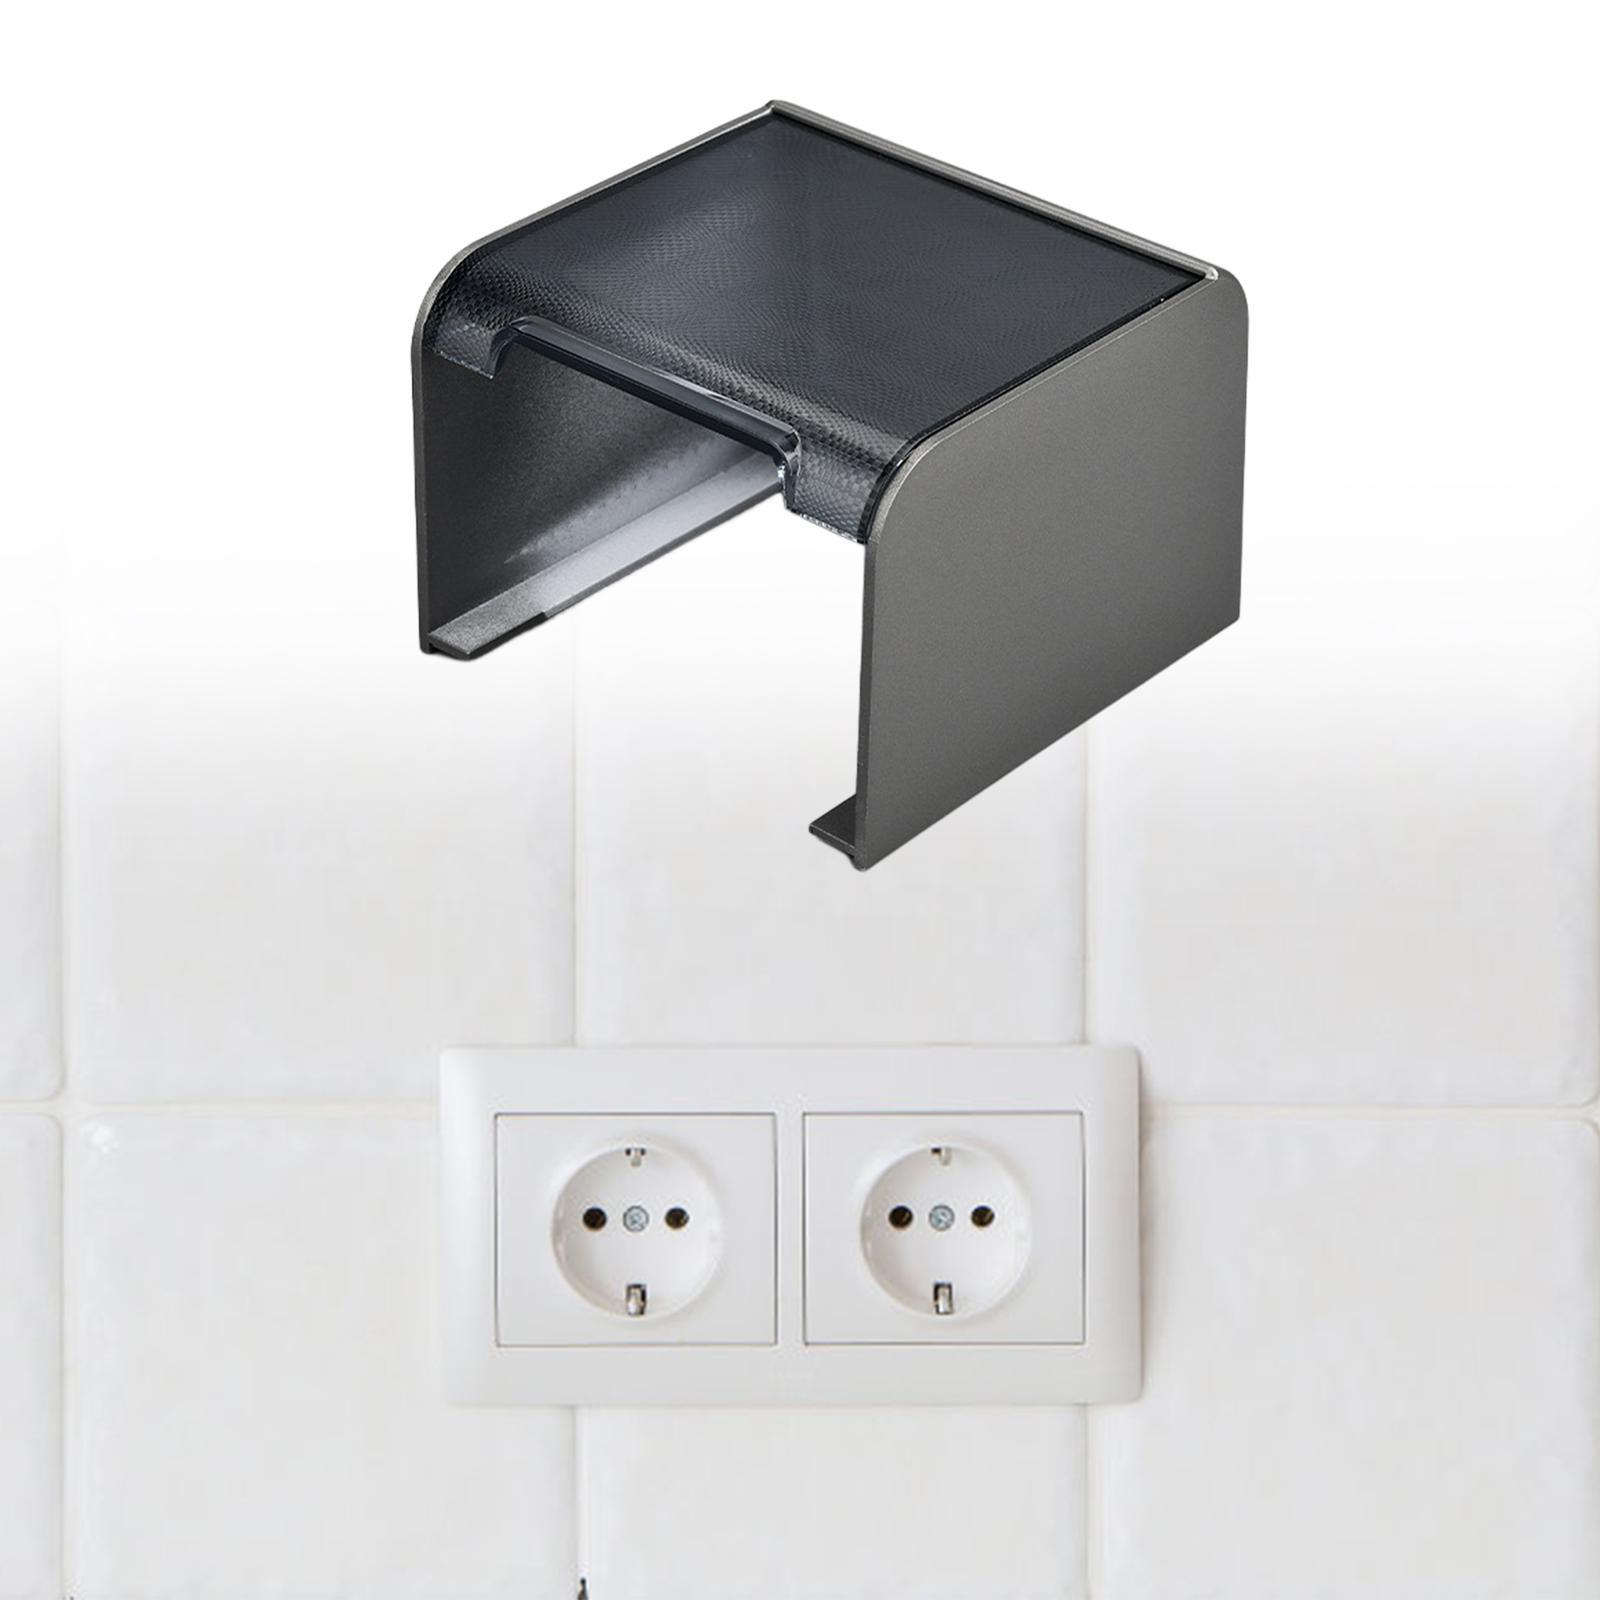 Socket Cover Plug Protector Easy to Use Outlet Box Durable Wall Switch Cover